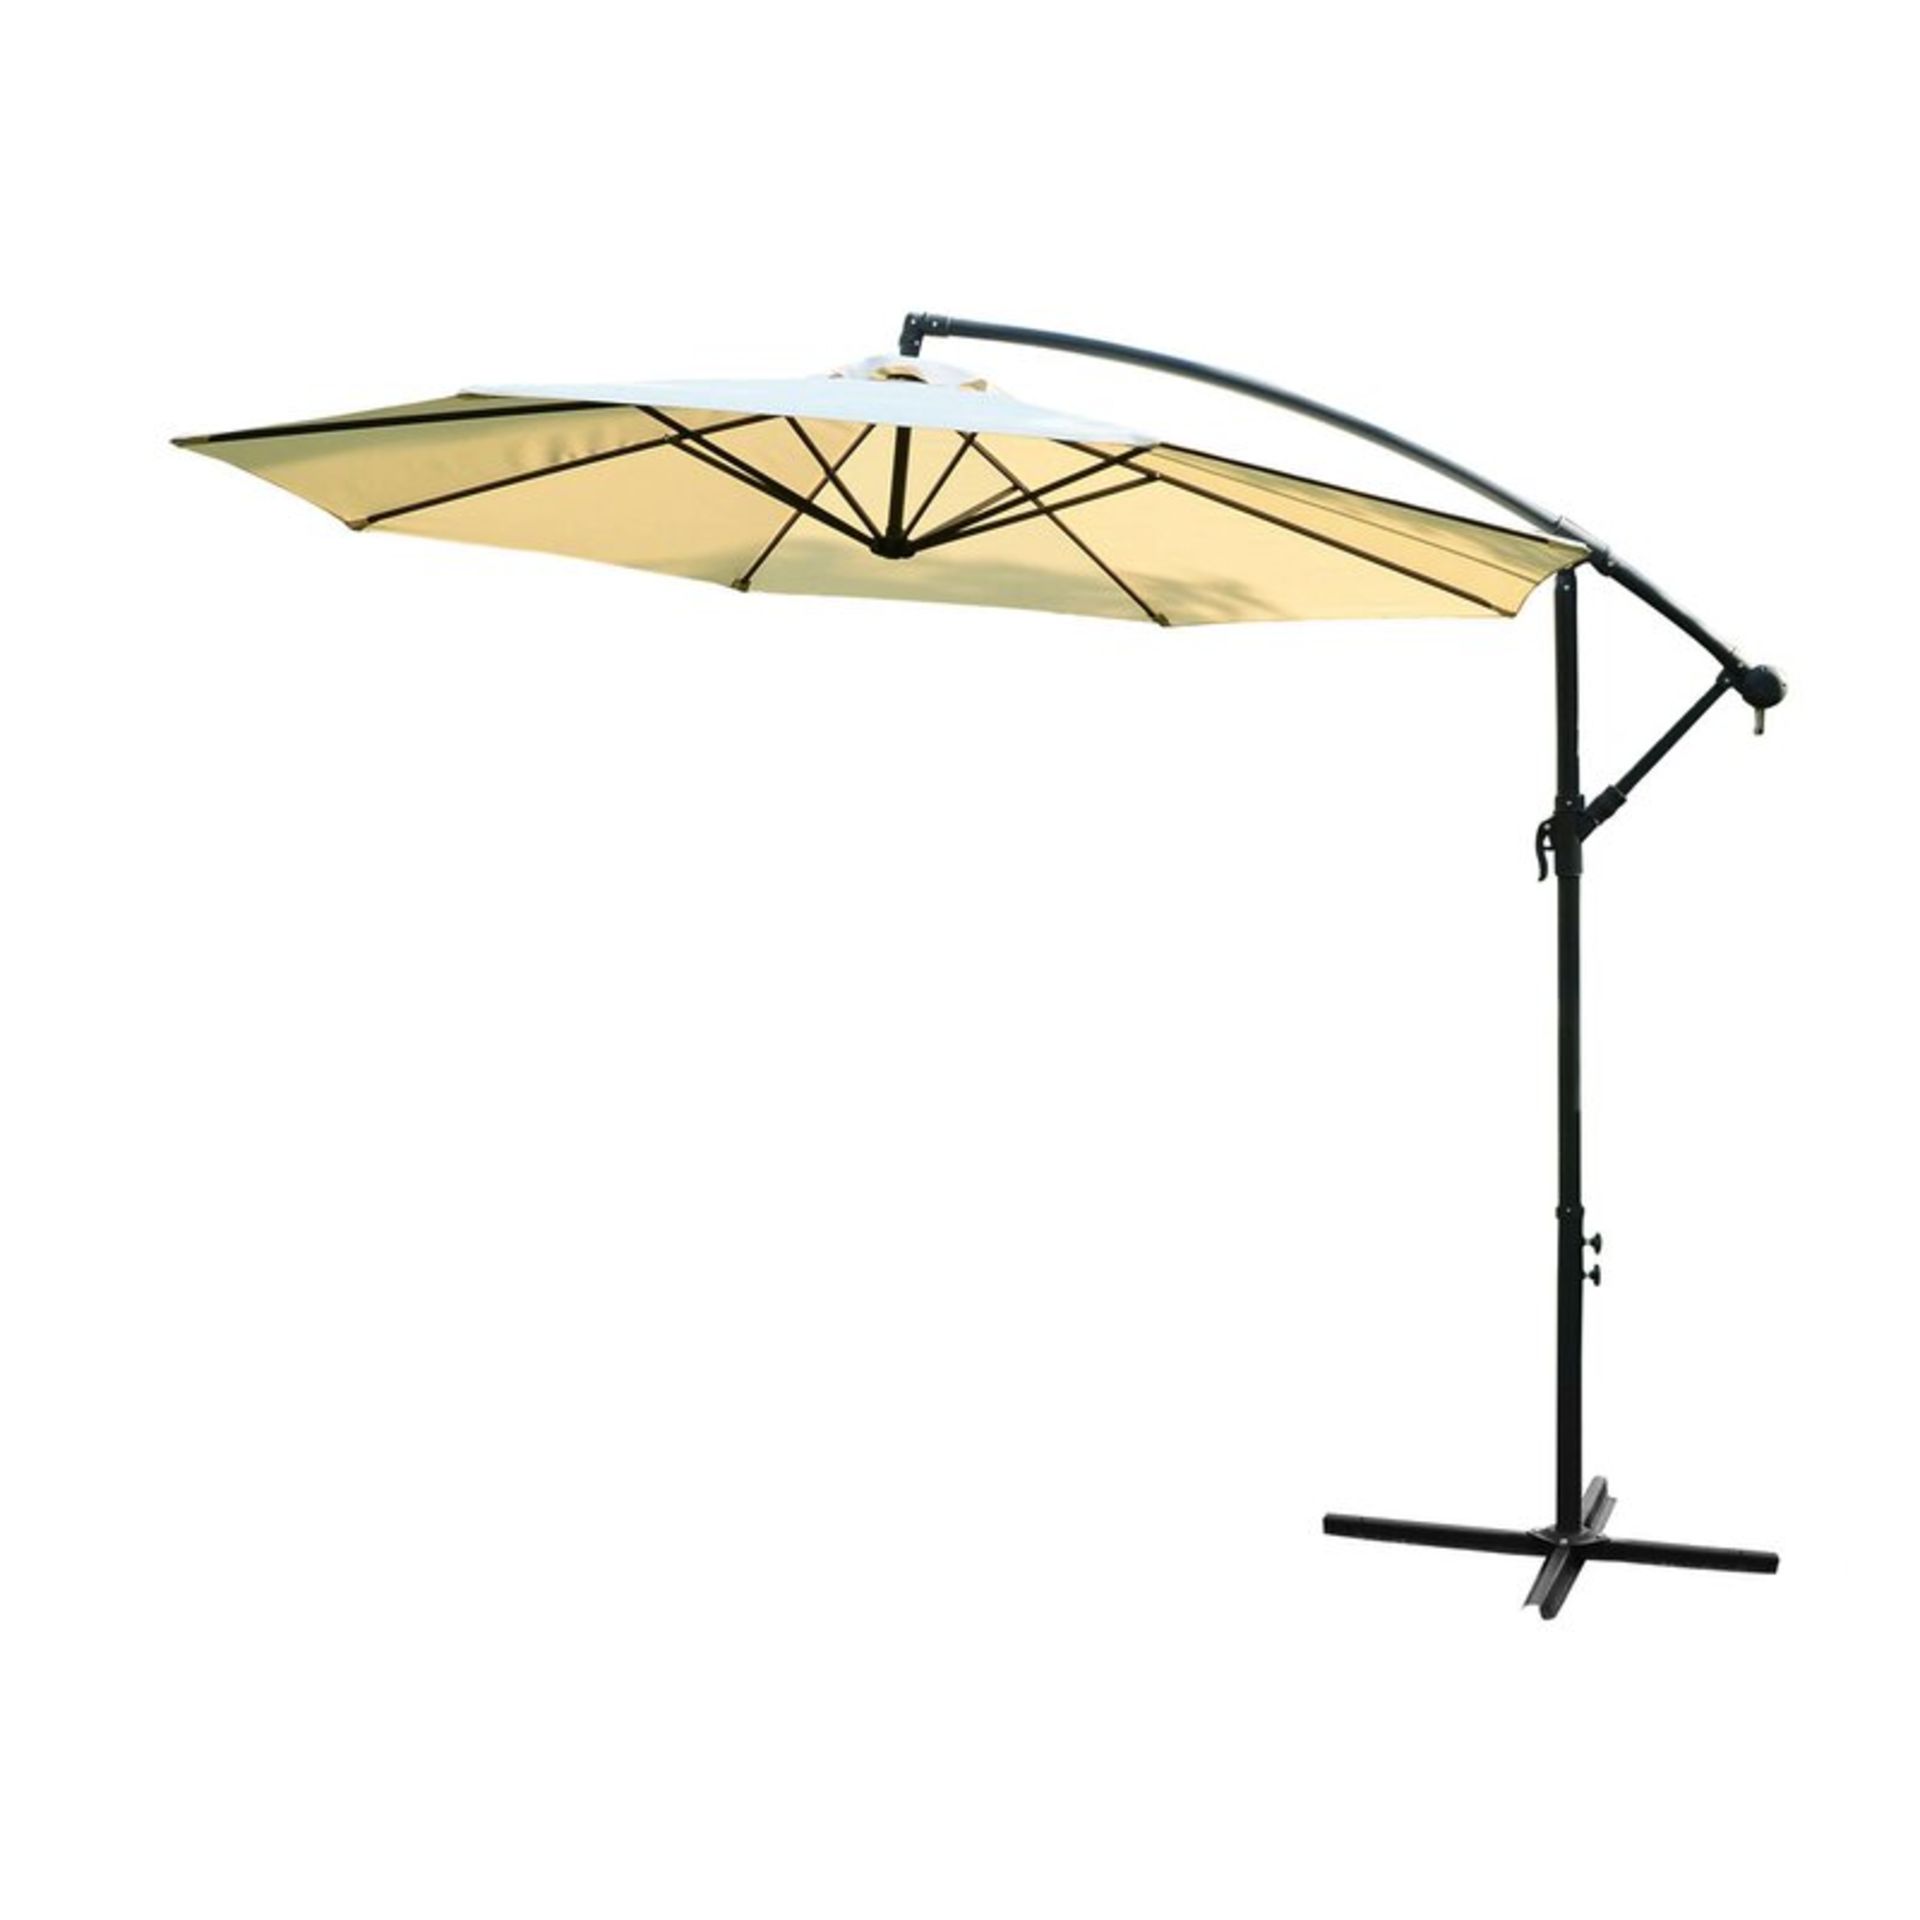 Amazonia 3m Cantilever Parasol - RRP £113.99 - Image 3 of 3